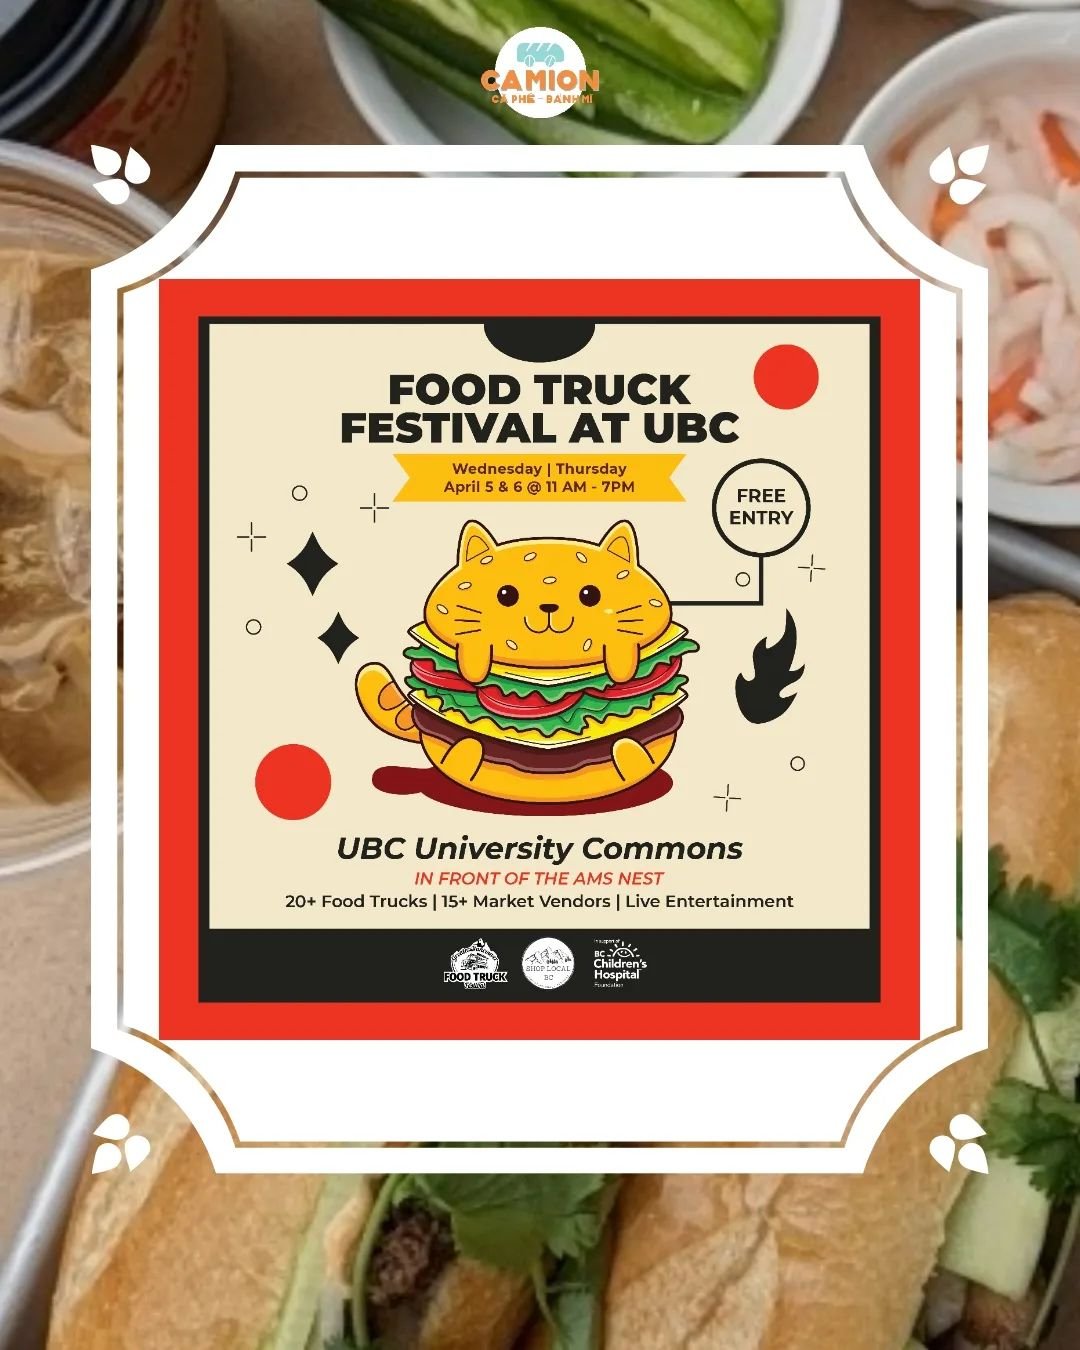 Get ready to indulge in the tastiest Food Truck festival at UBC next week! Mark your calendars for Apr 5 &amp; 6 11-7pm and come hungry to UBC University Commons for days filled with mouth-watering eats, refreshing drinks and live entertainment. Brin